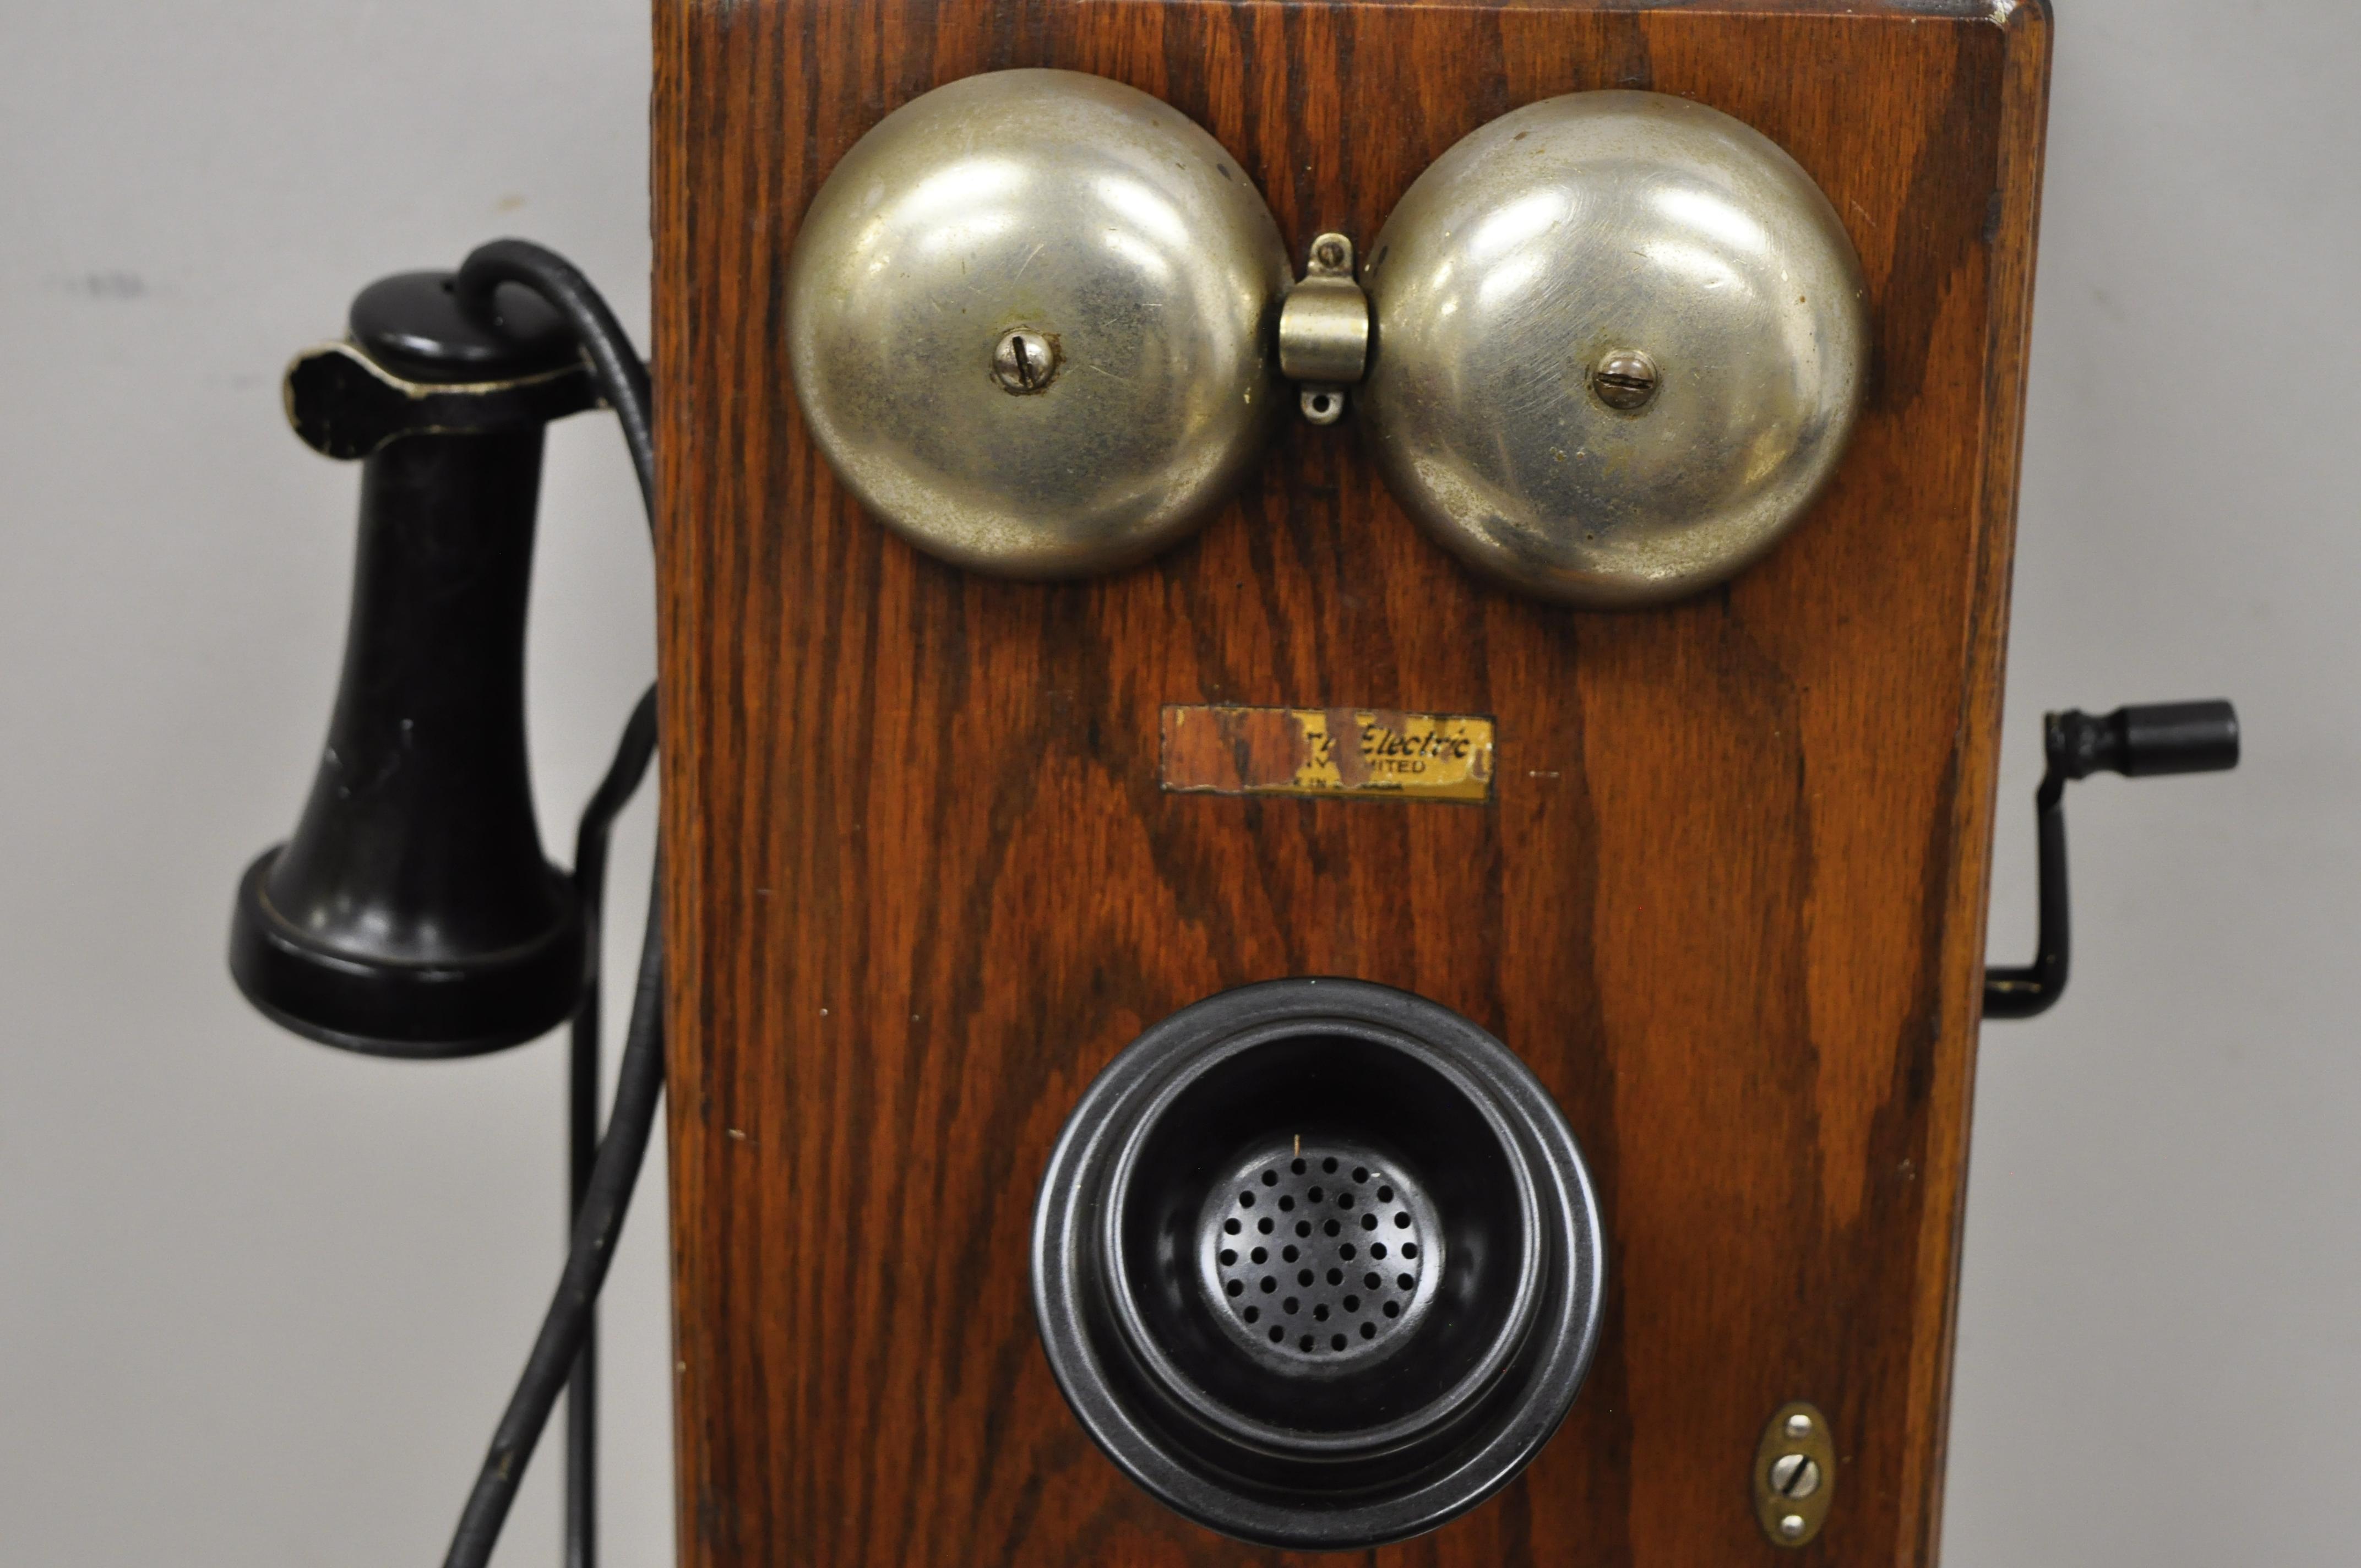 western electric antique wall phone